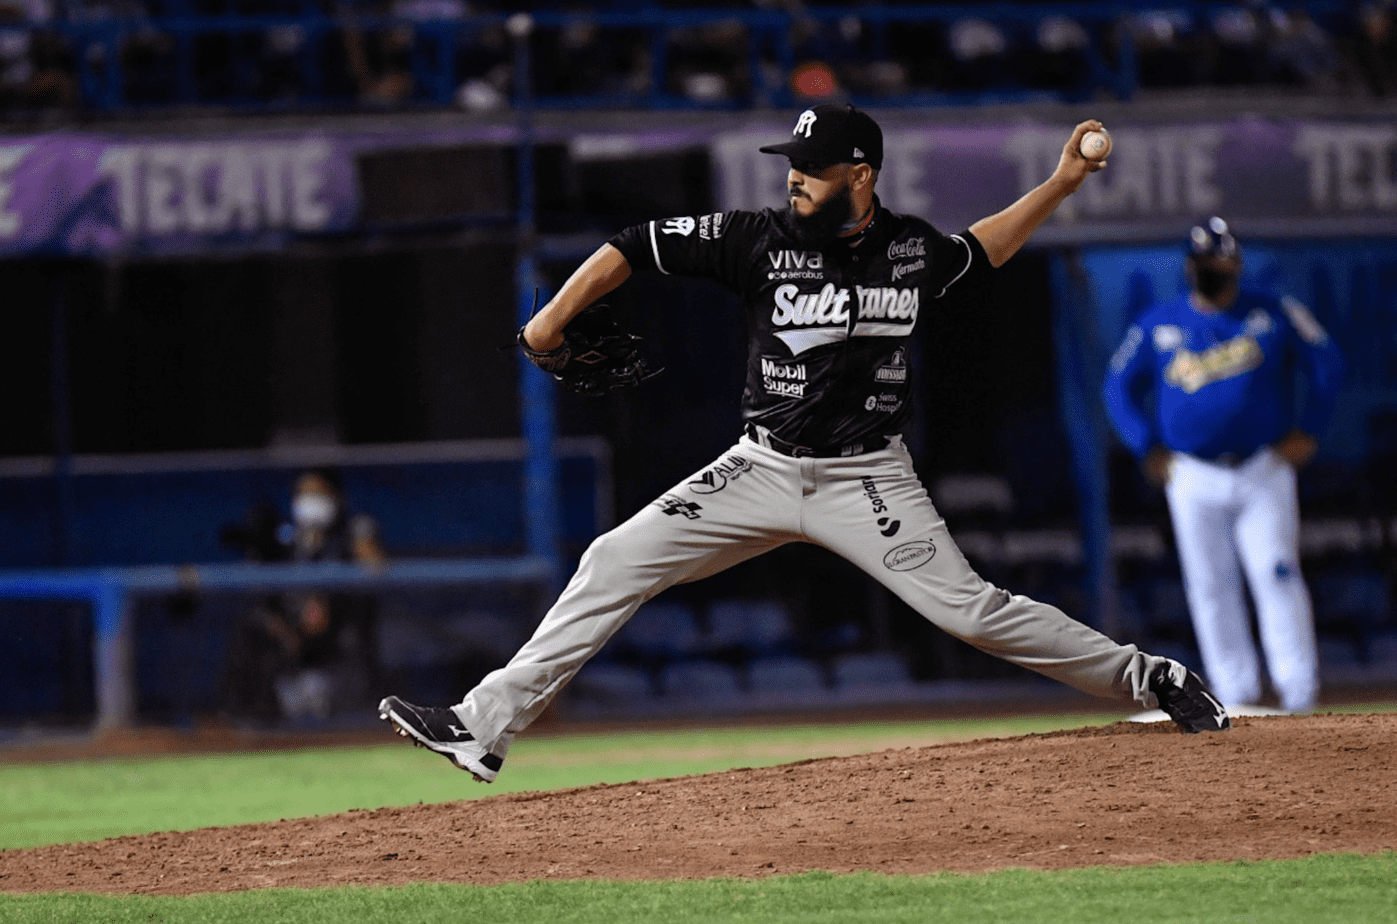 LMB July 05th – Betting Lines and Picks